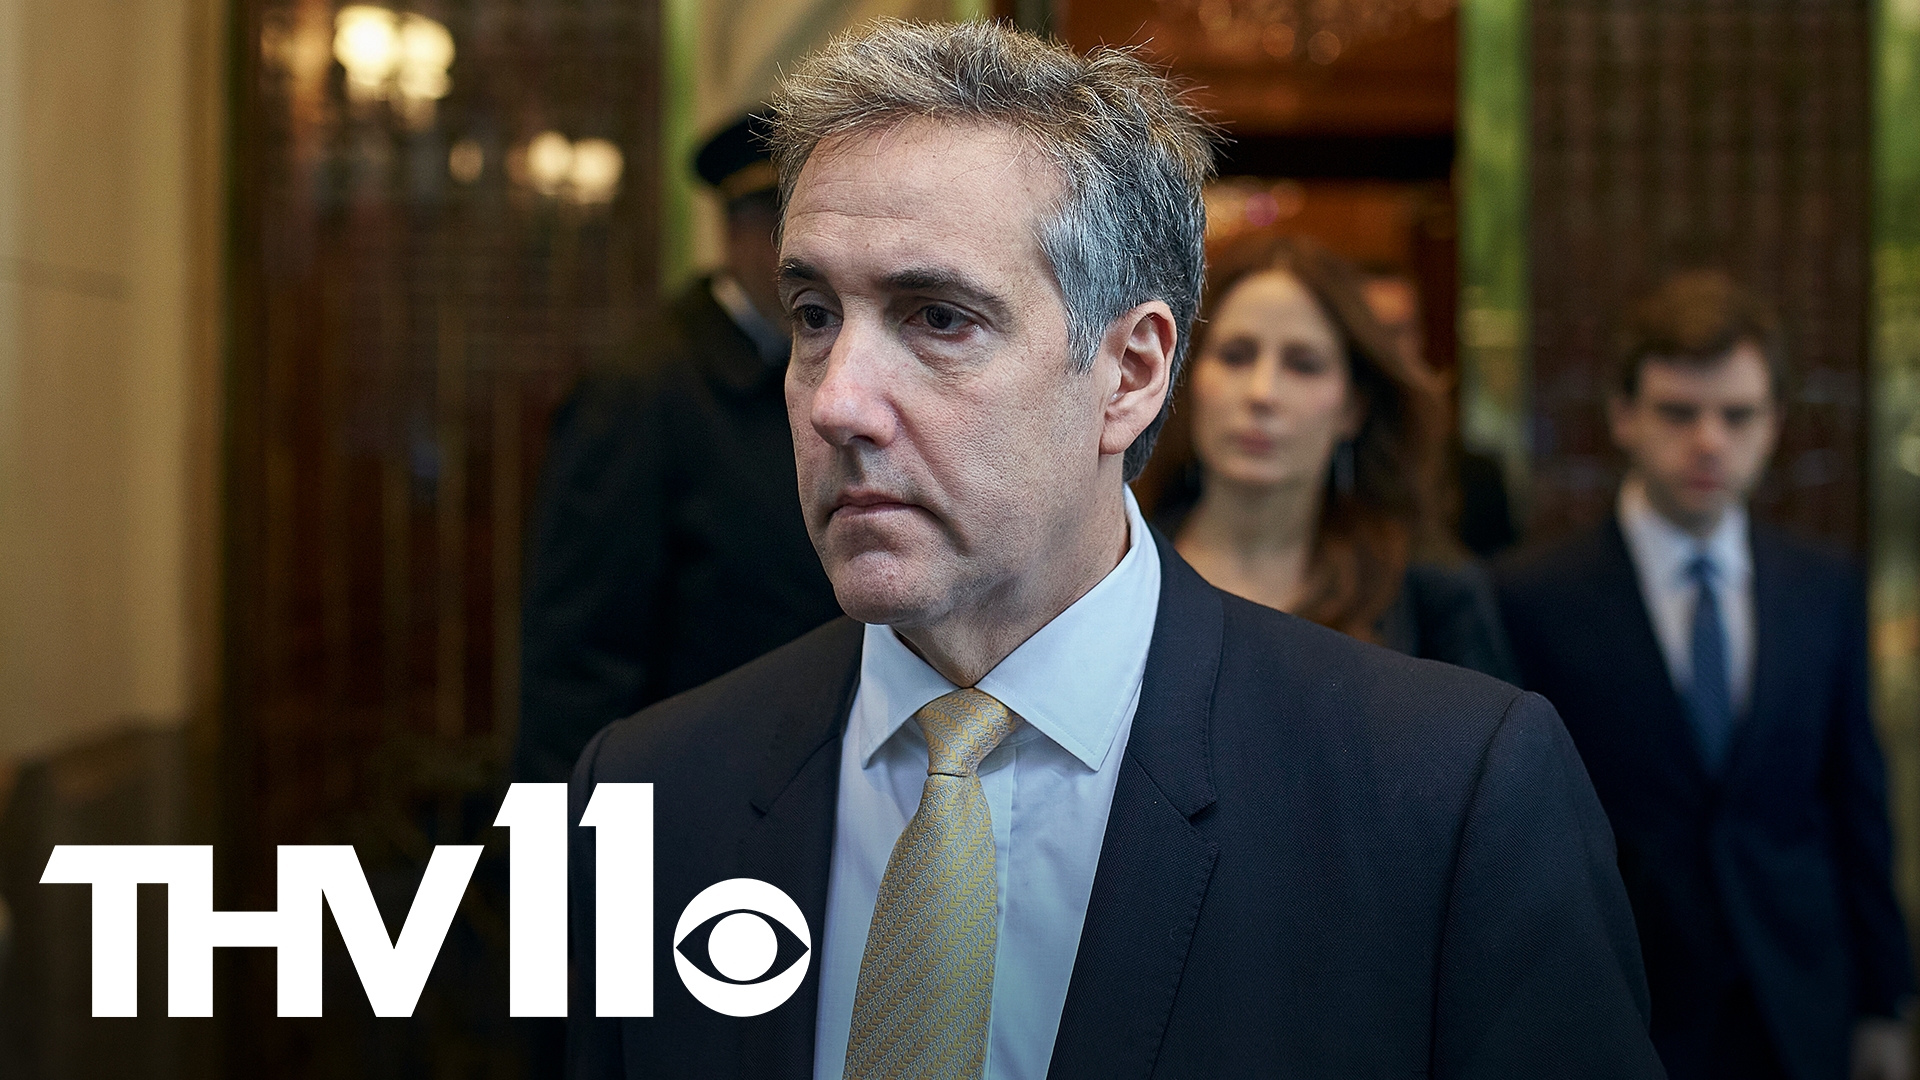 With the defense not expected to call many witnesses, Cohen's cross-examination is a pivotal moment for Trump's team, who must convince jurors he can't be believed.